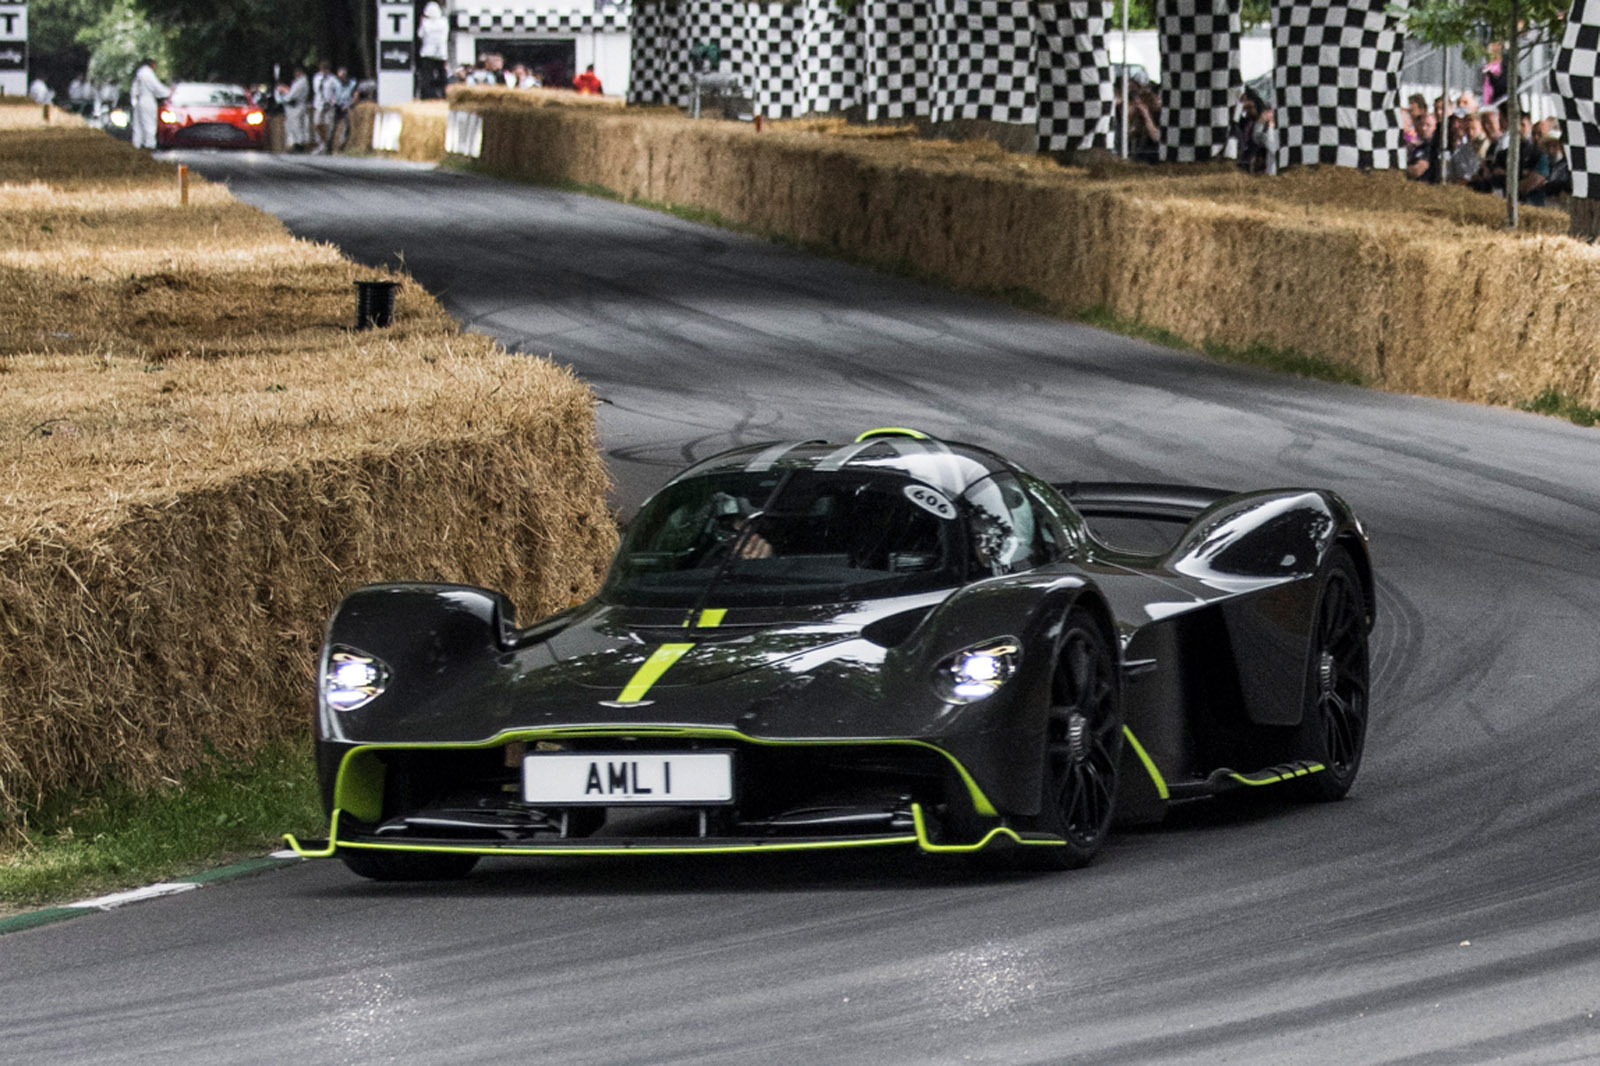 Racing lines: A ride in the Aston Martin Valkyrie